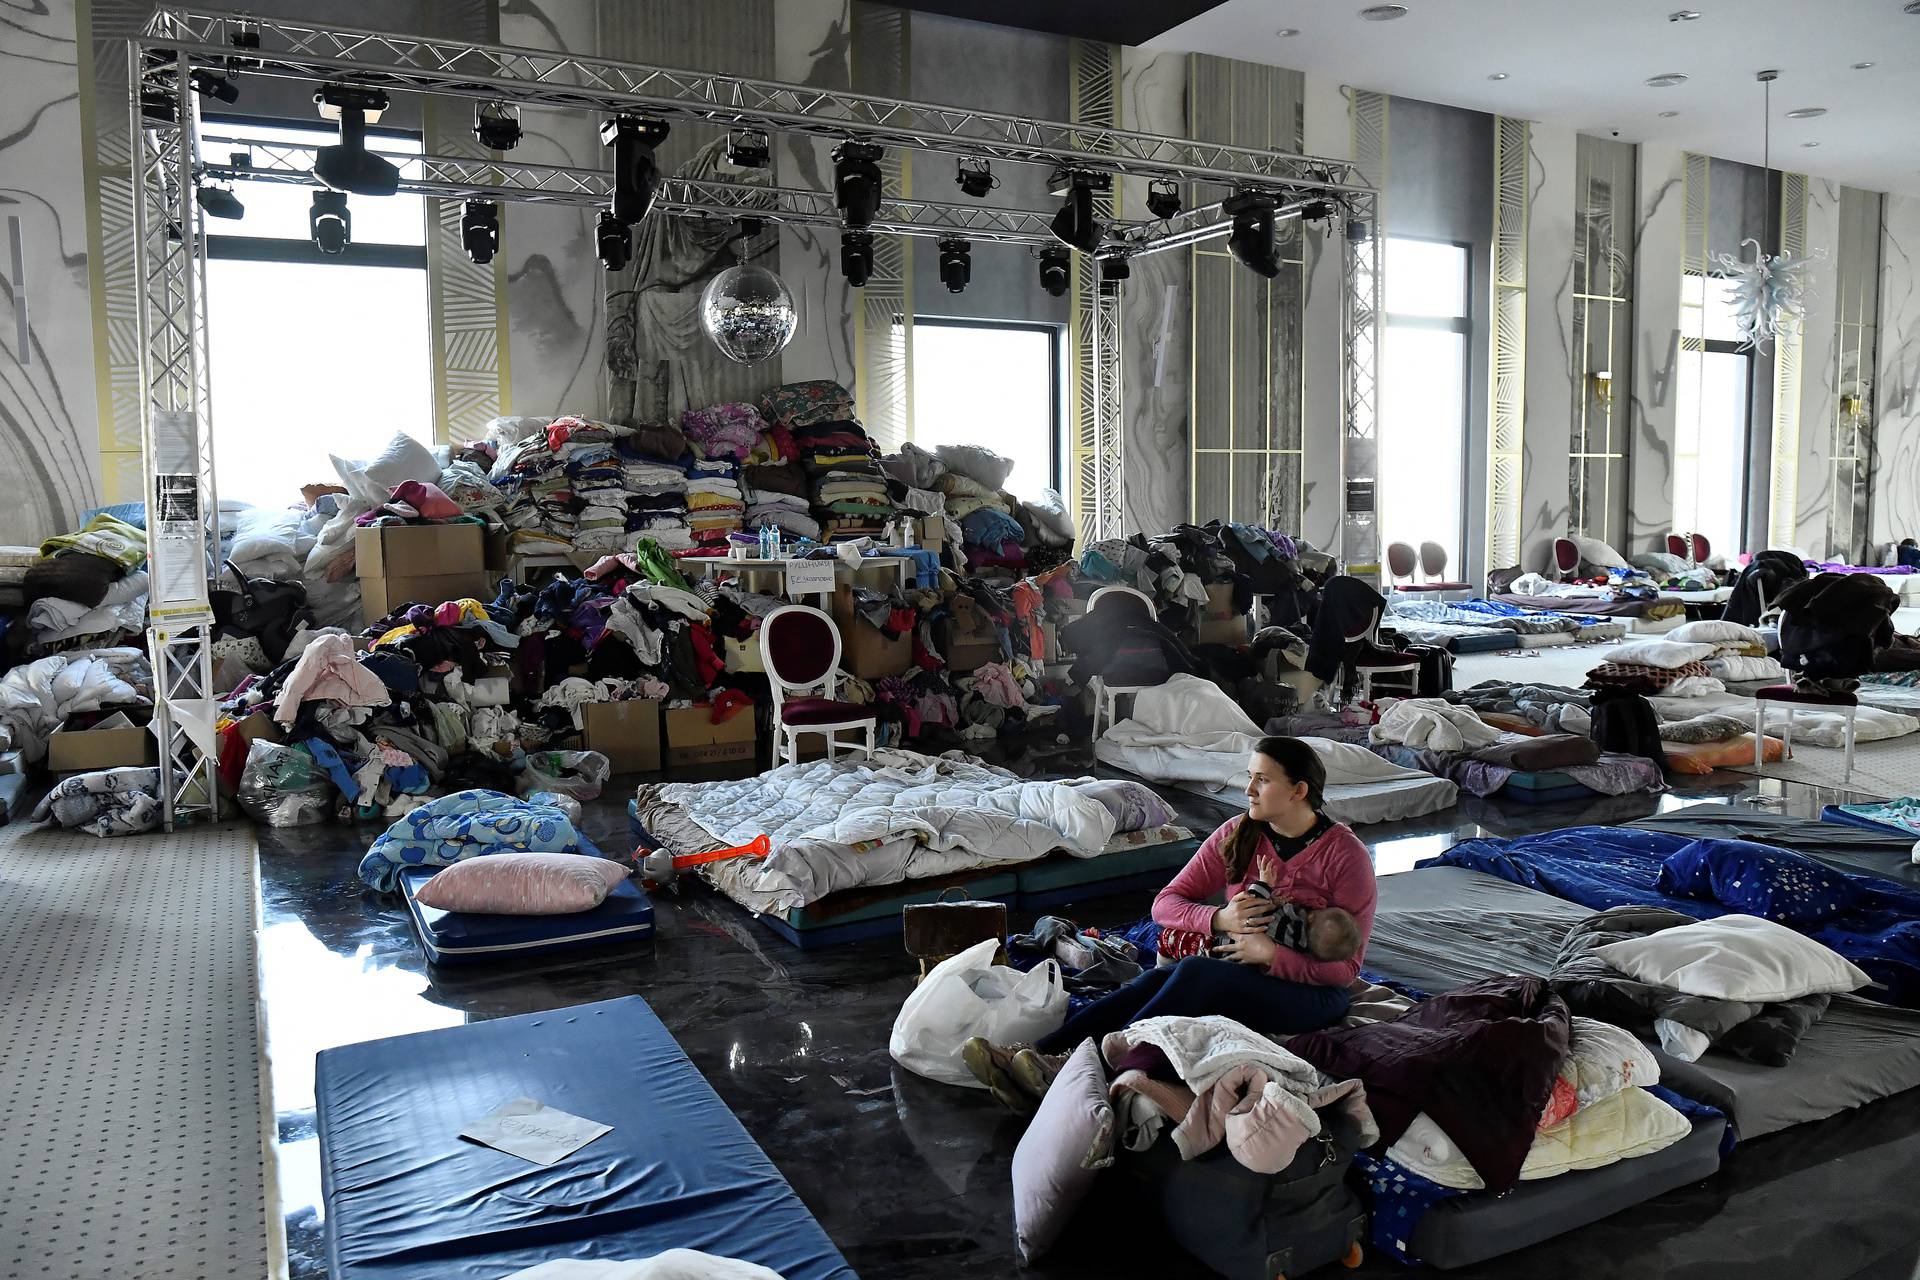 People fleeing Russia's invasion of Ukraine take refuge in a ballroom in a hotel in Suceava, in Romania